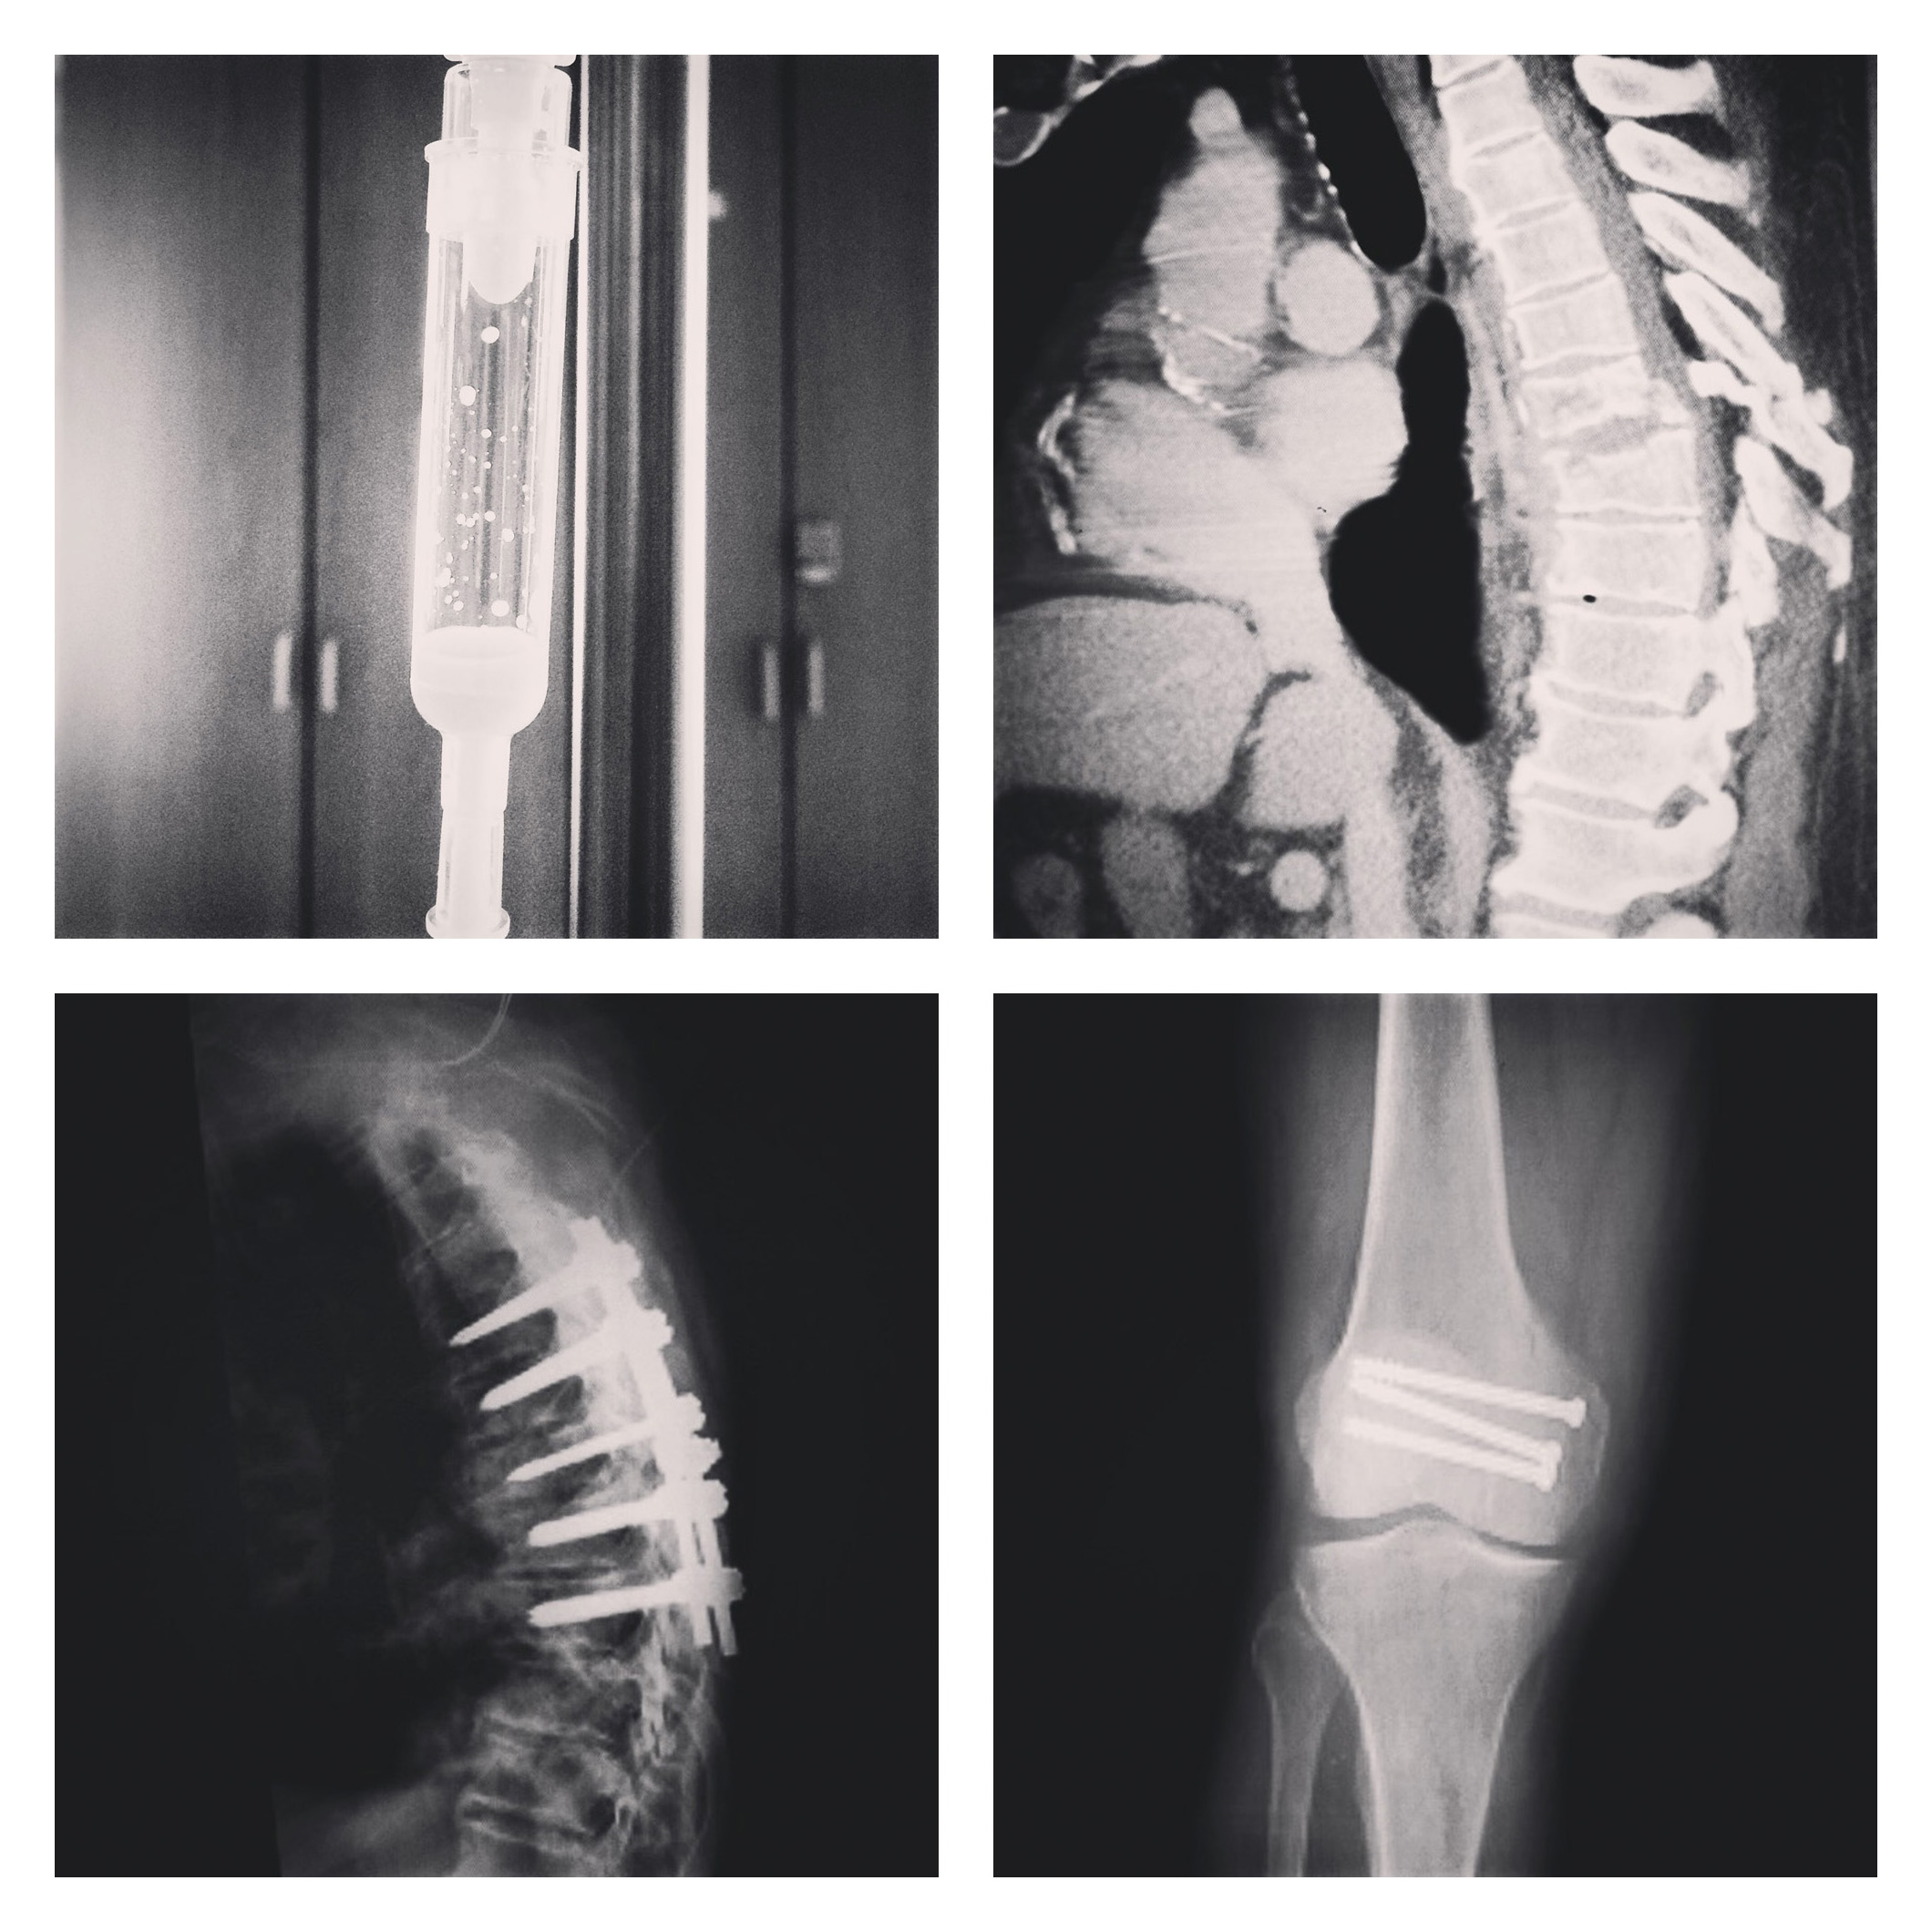 Food Drip; Fractured and Separated Spine; Spine With Pins; Screws